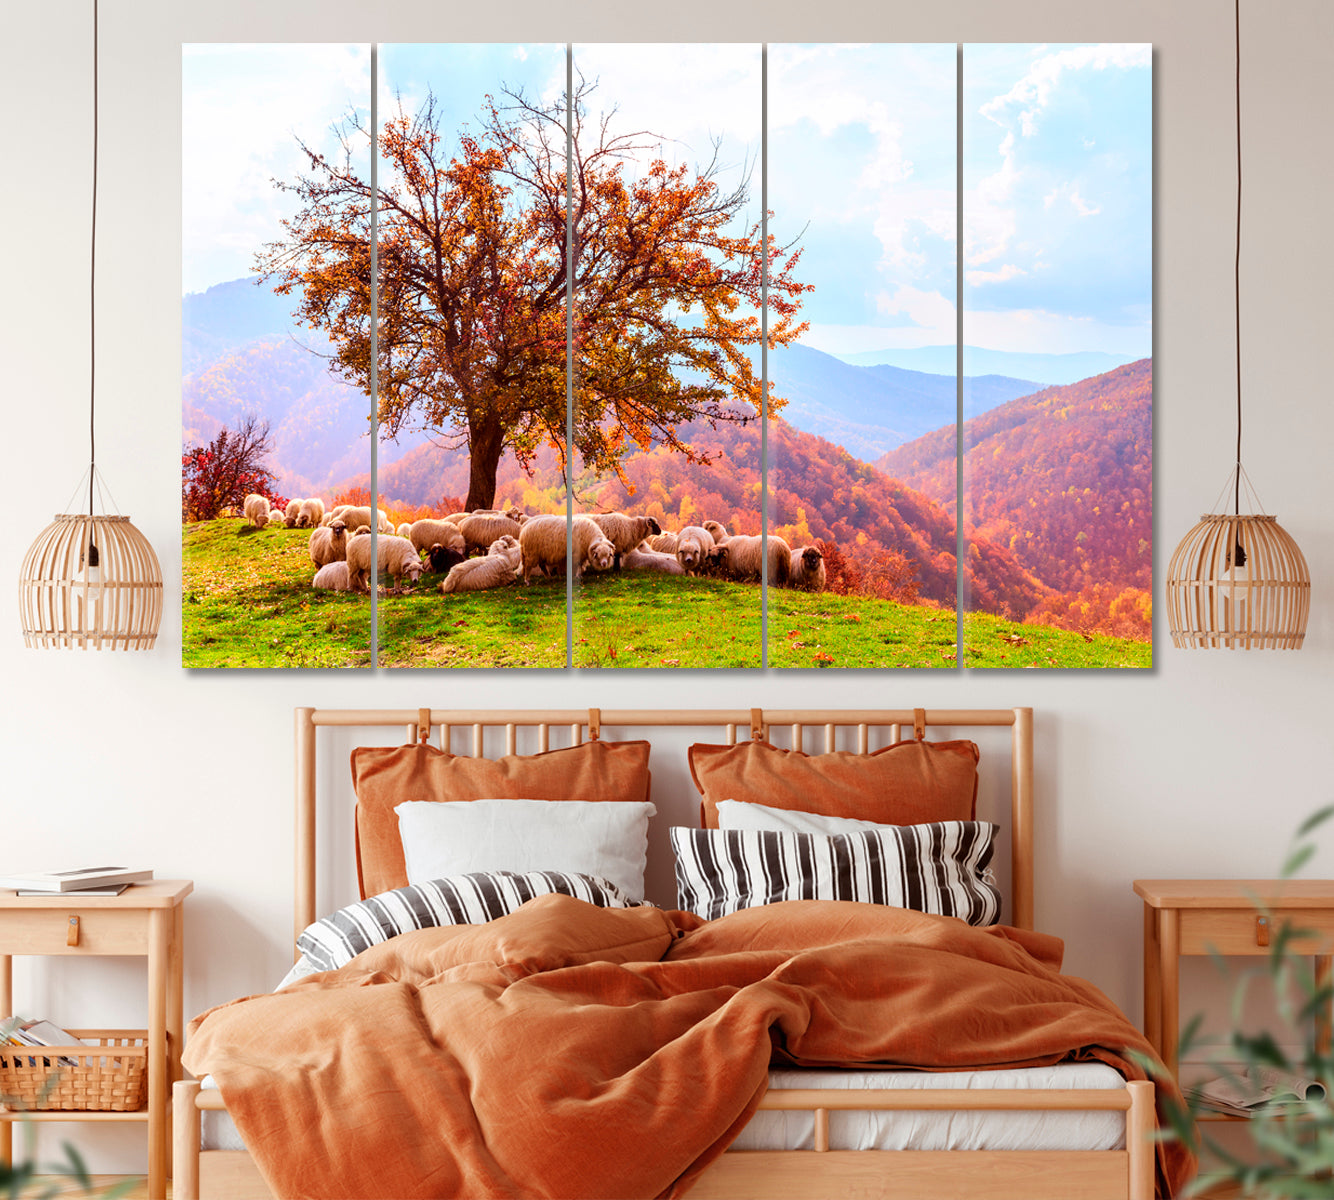 Sheep in Romanian Carpathians Canvas Print ArtLexy 5 Panels 36"x24" inches 